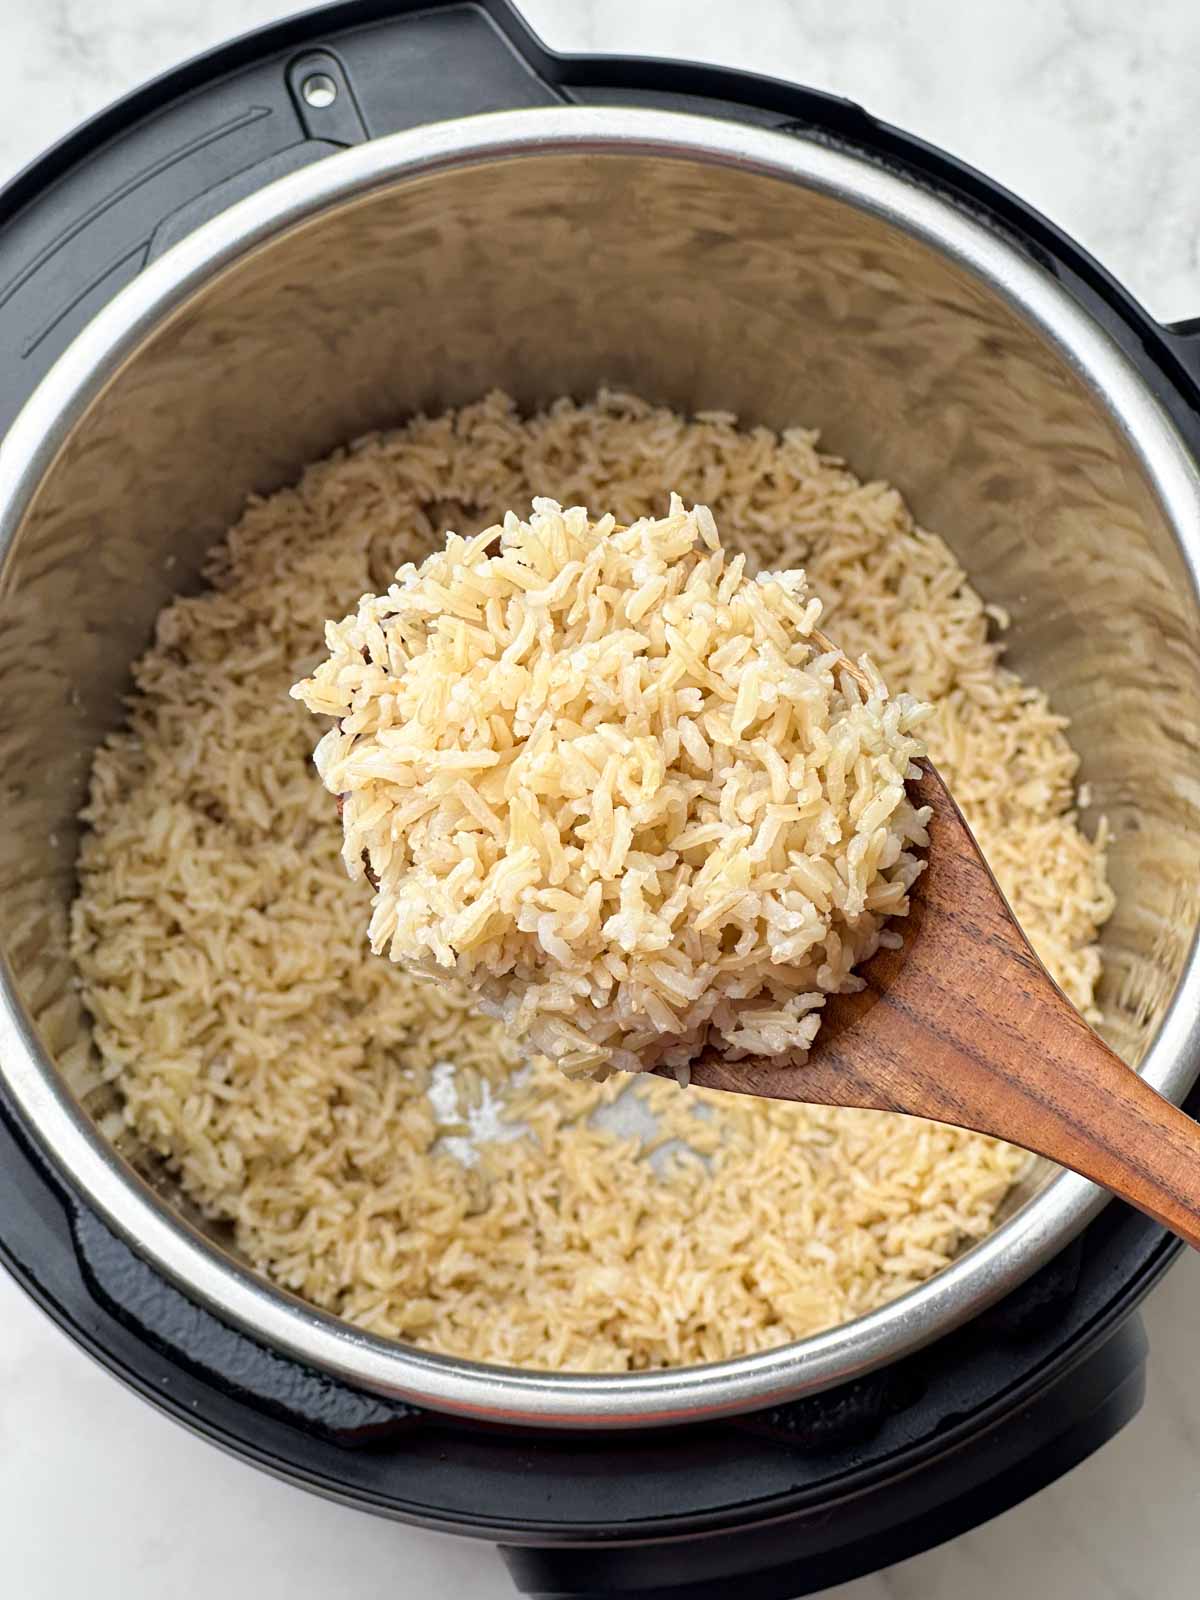 fluffy brown basmati rice in a ladle and instant opot